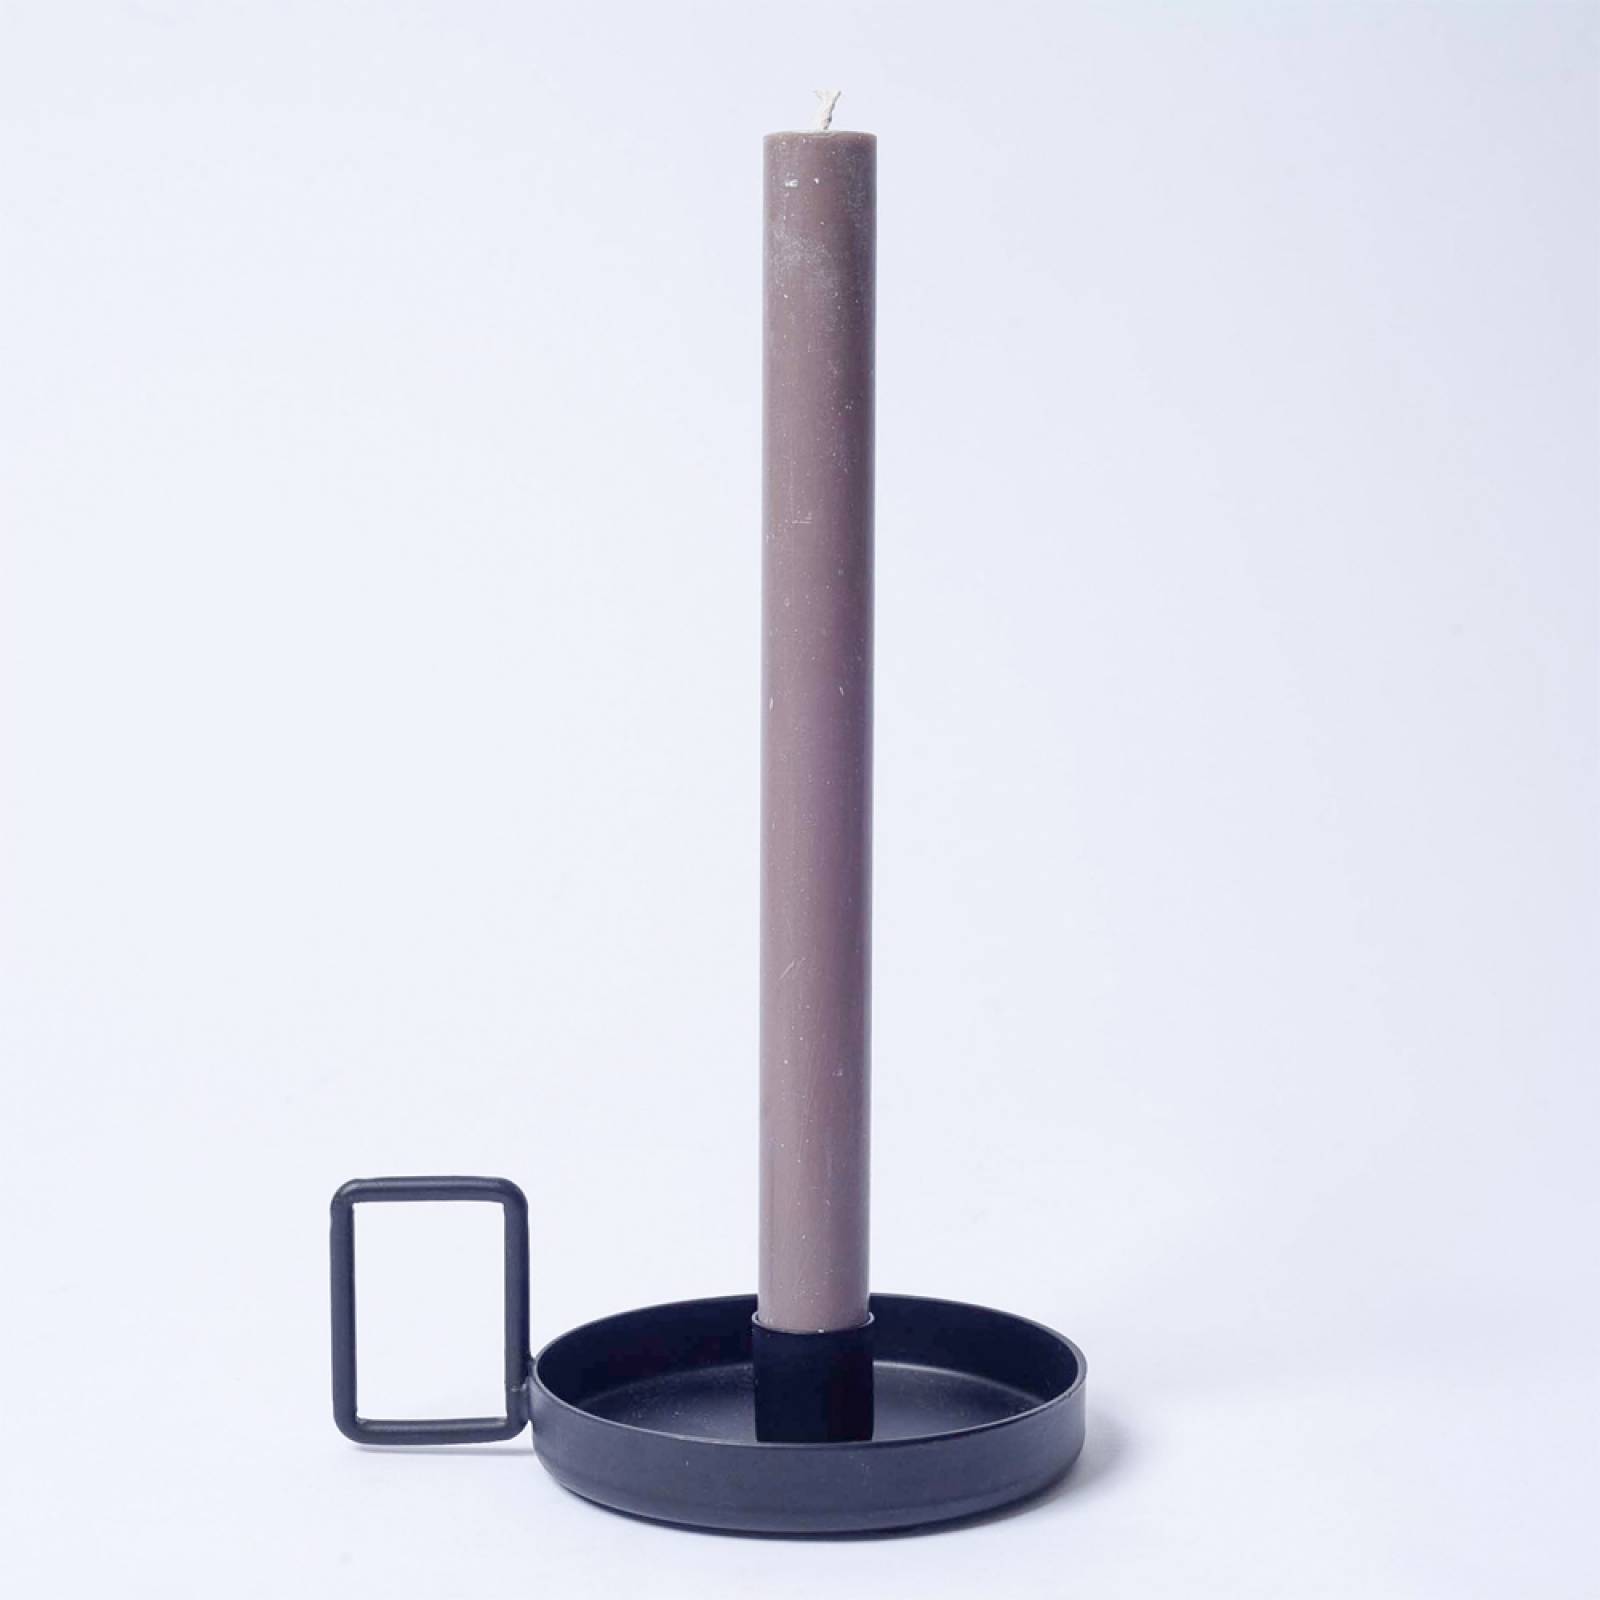 Black Candleholder Dish With Squared Handle thumbnails